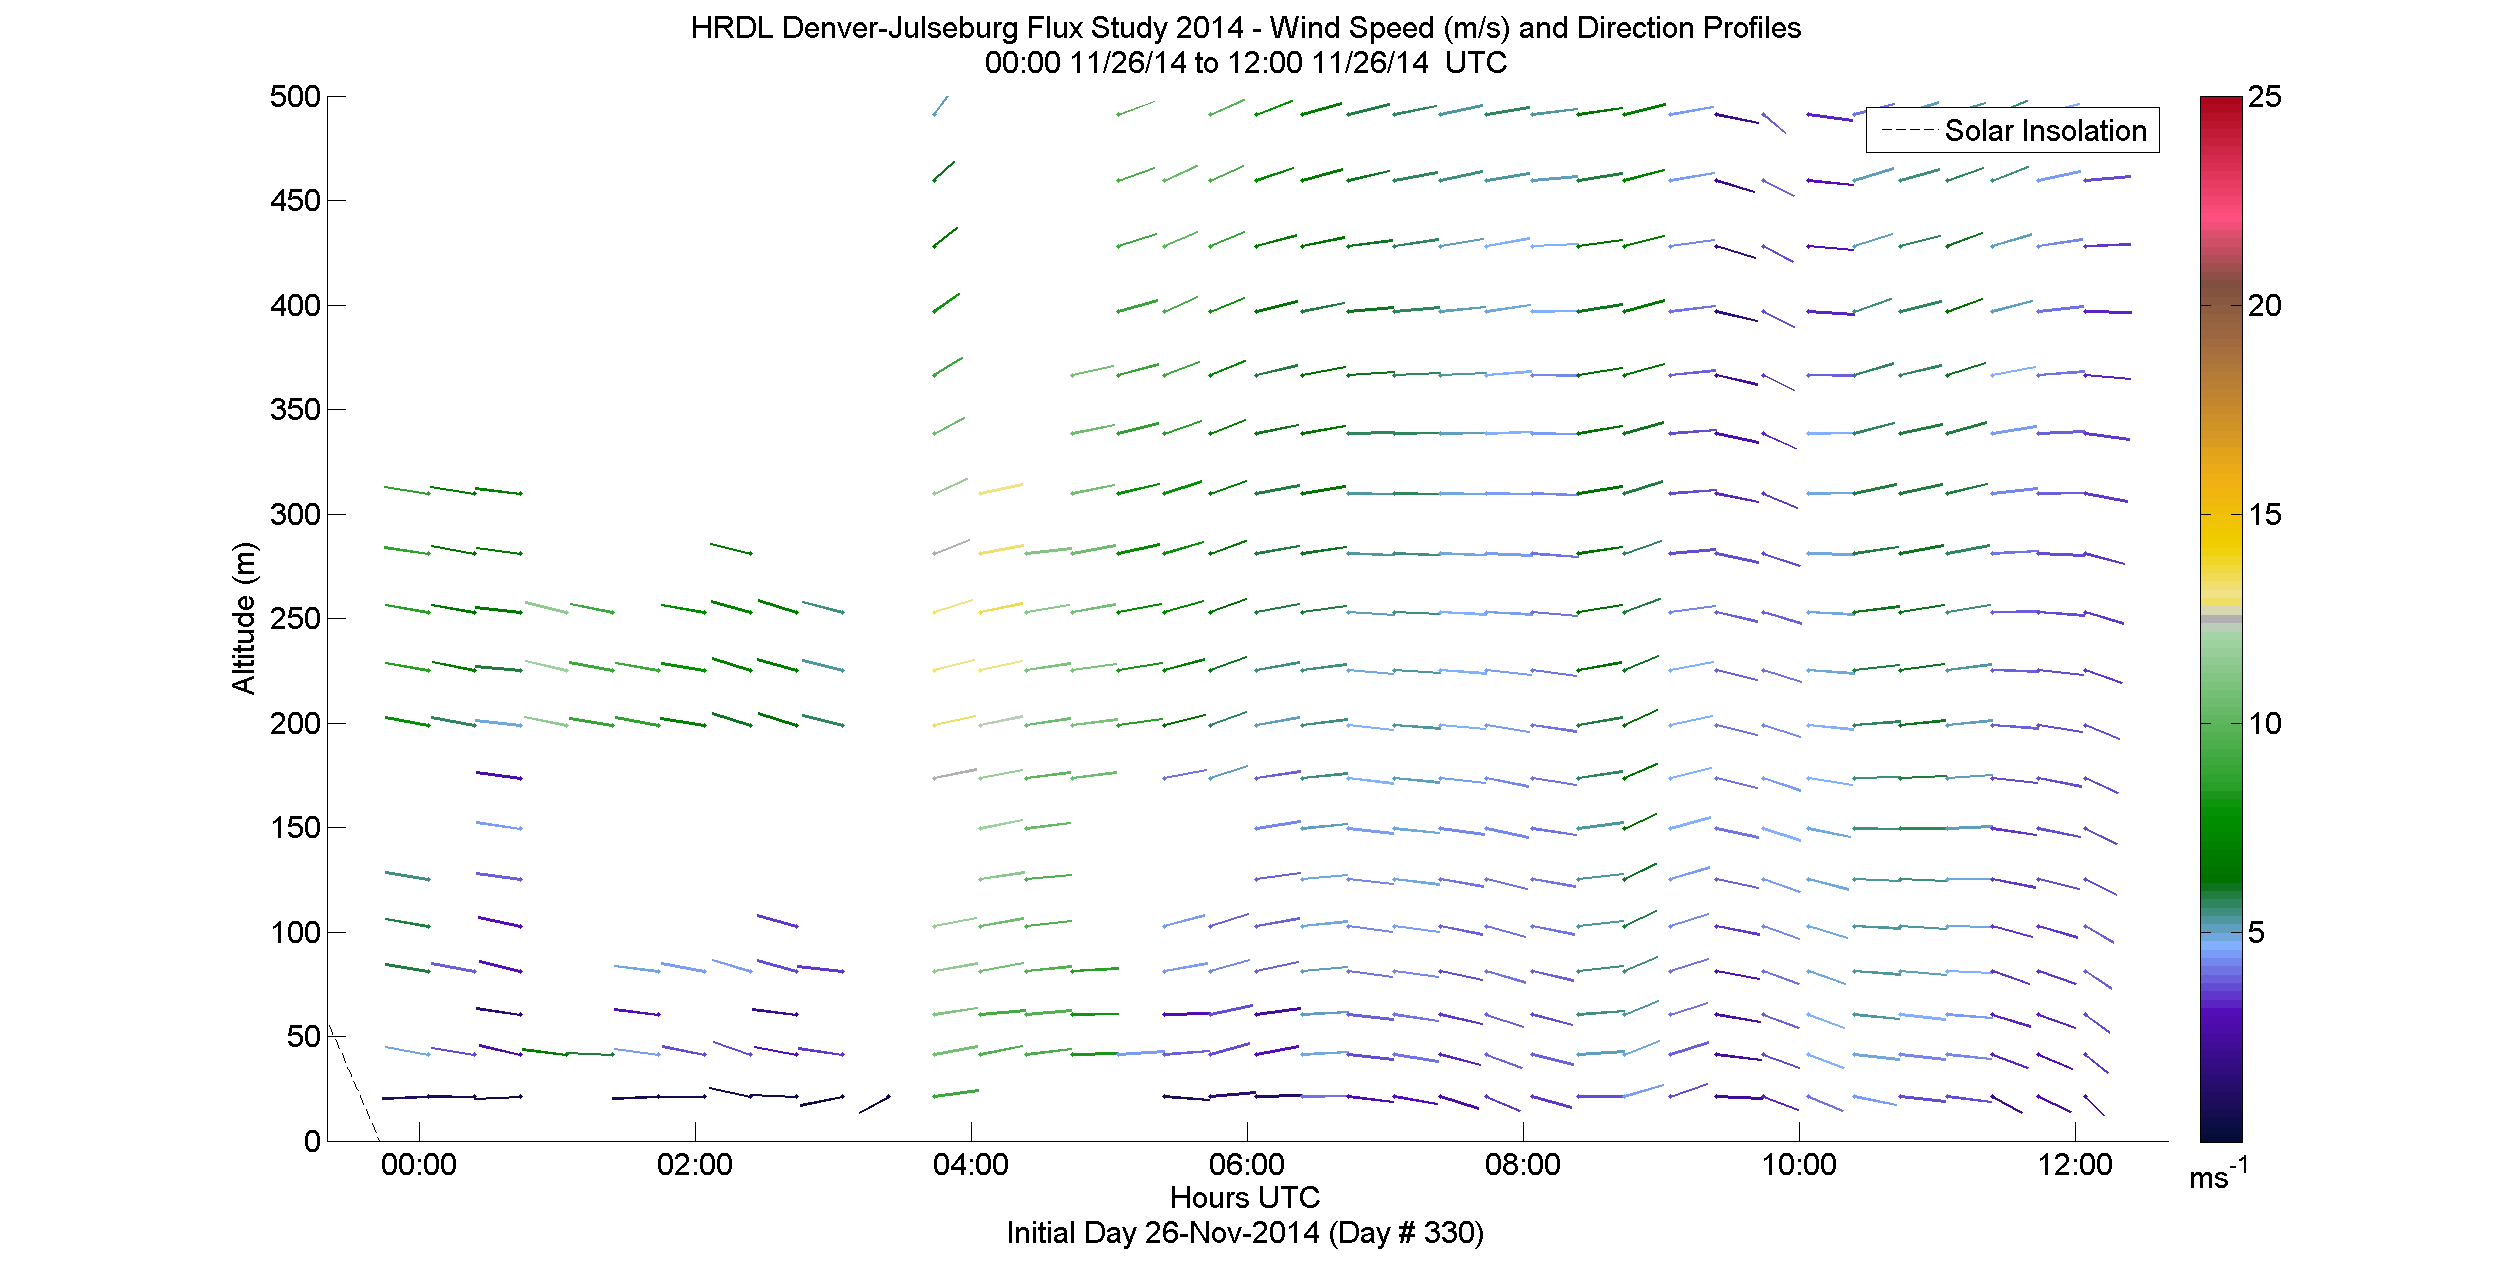 HRDL speed and direction profile - November 26 am